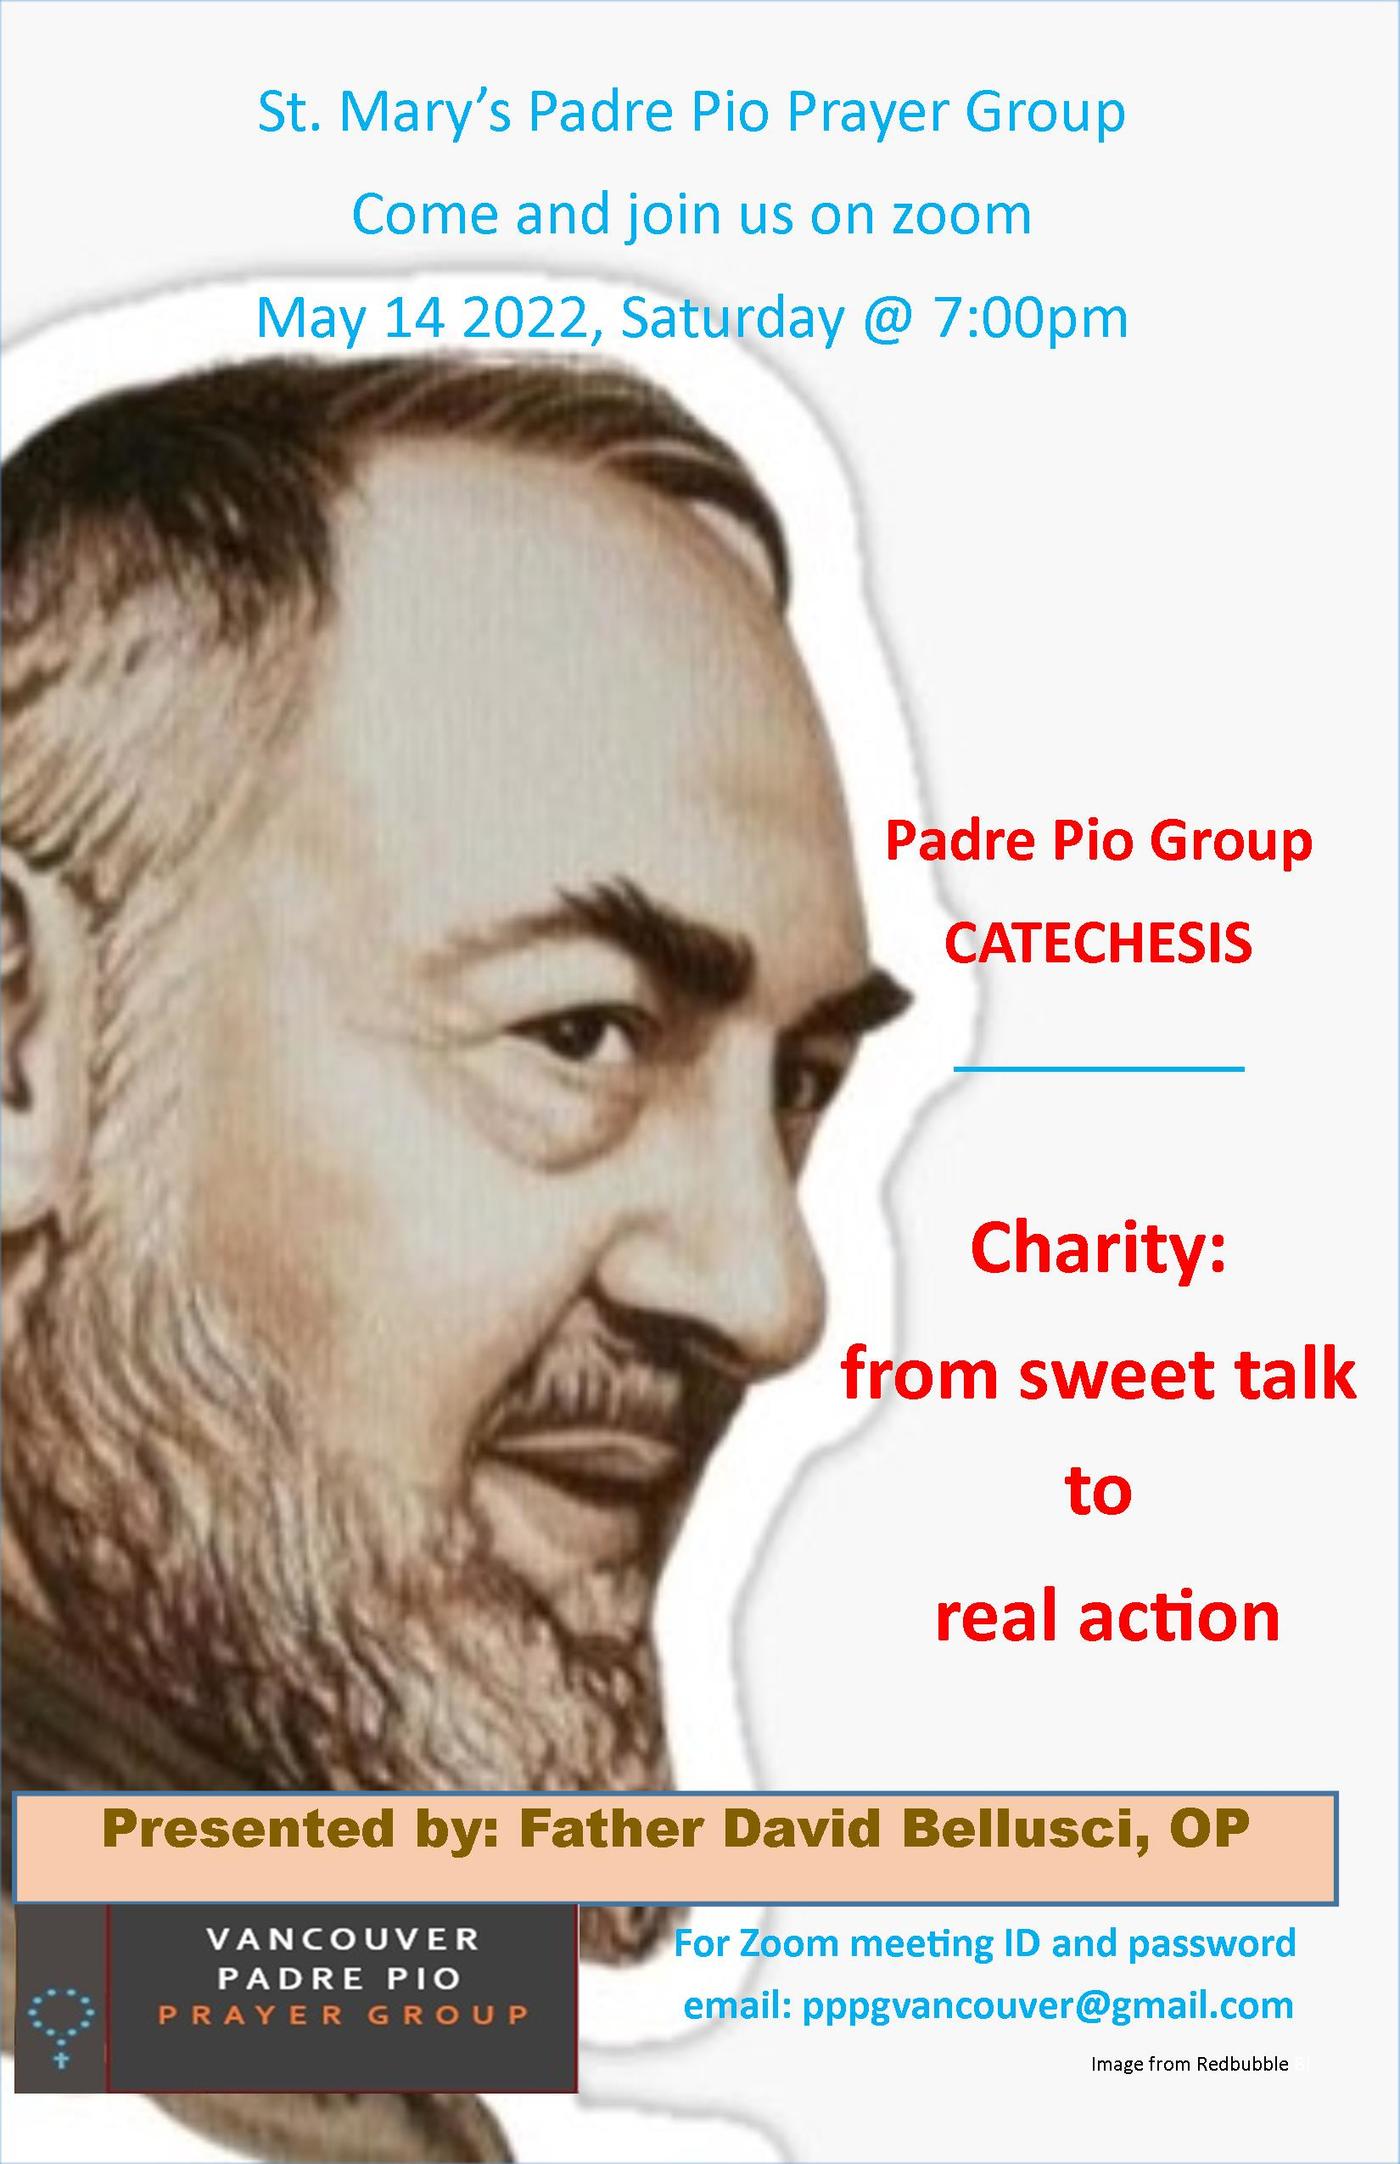 Online PPPG Catechesis Meeting with Father David Bellusci, OP - Behold